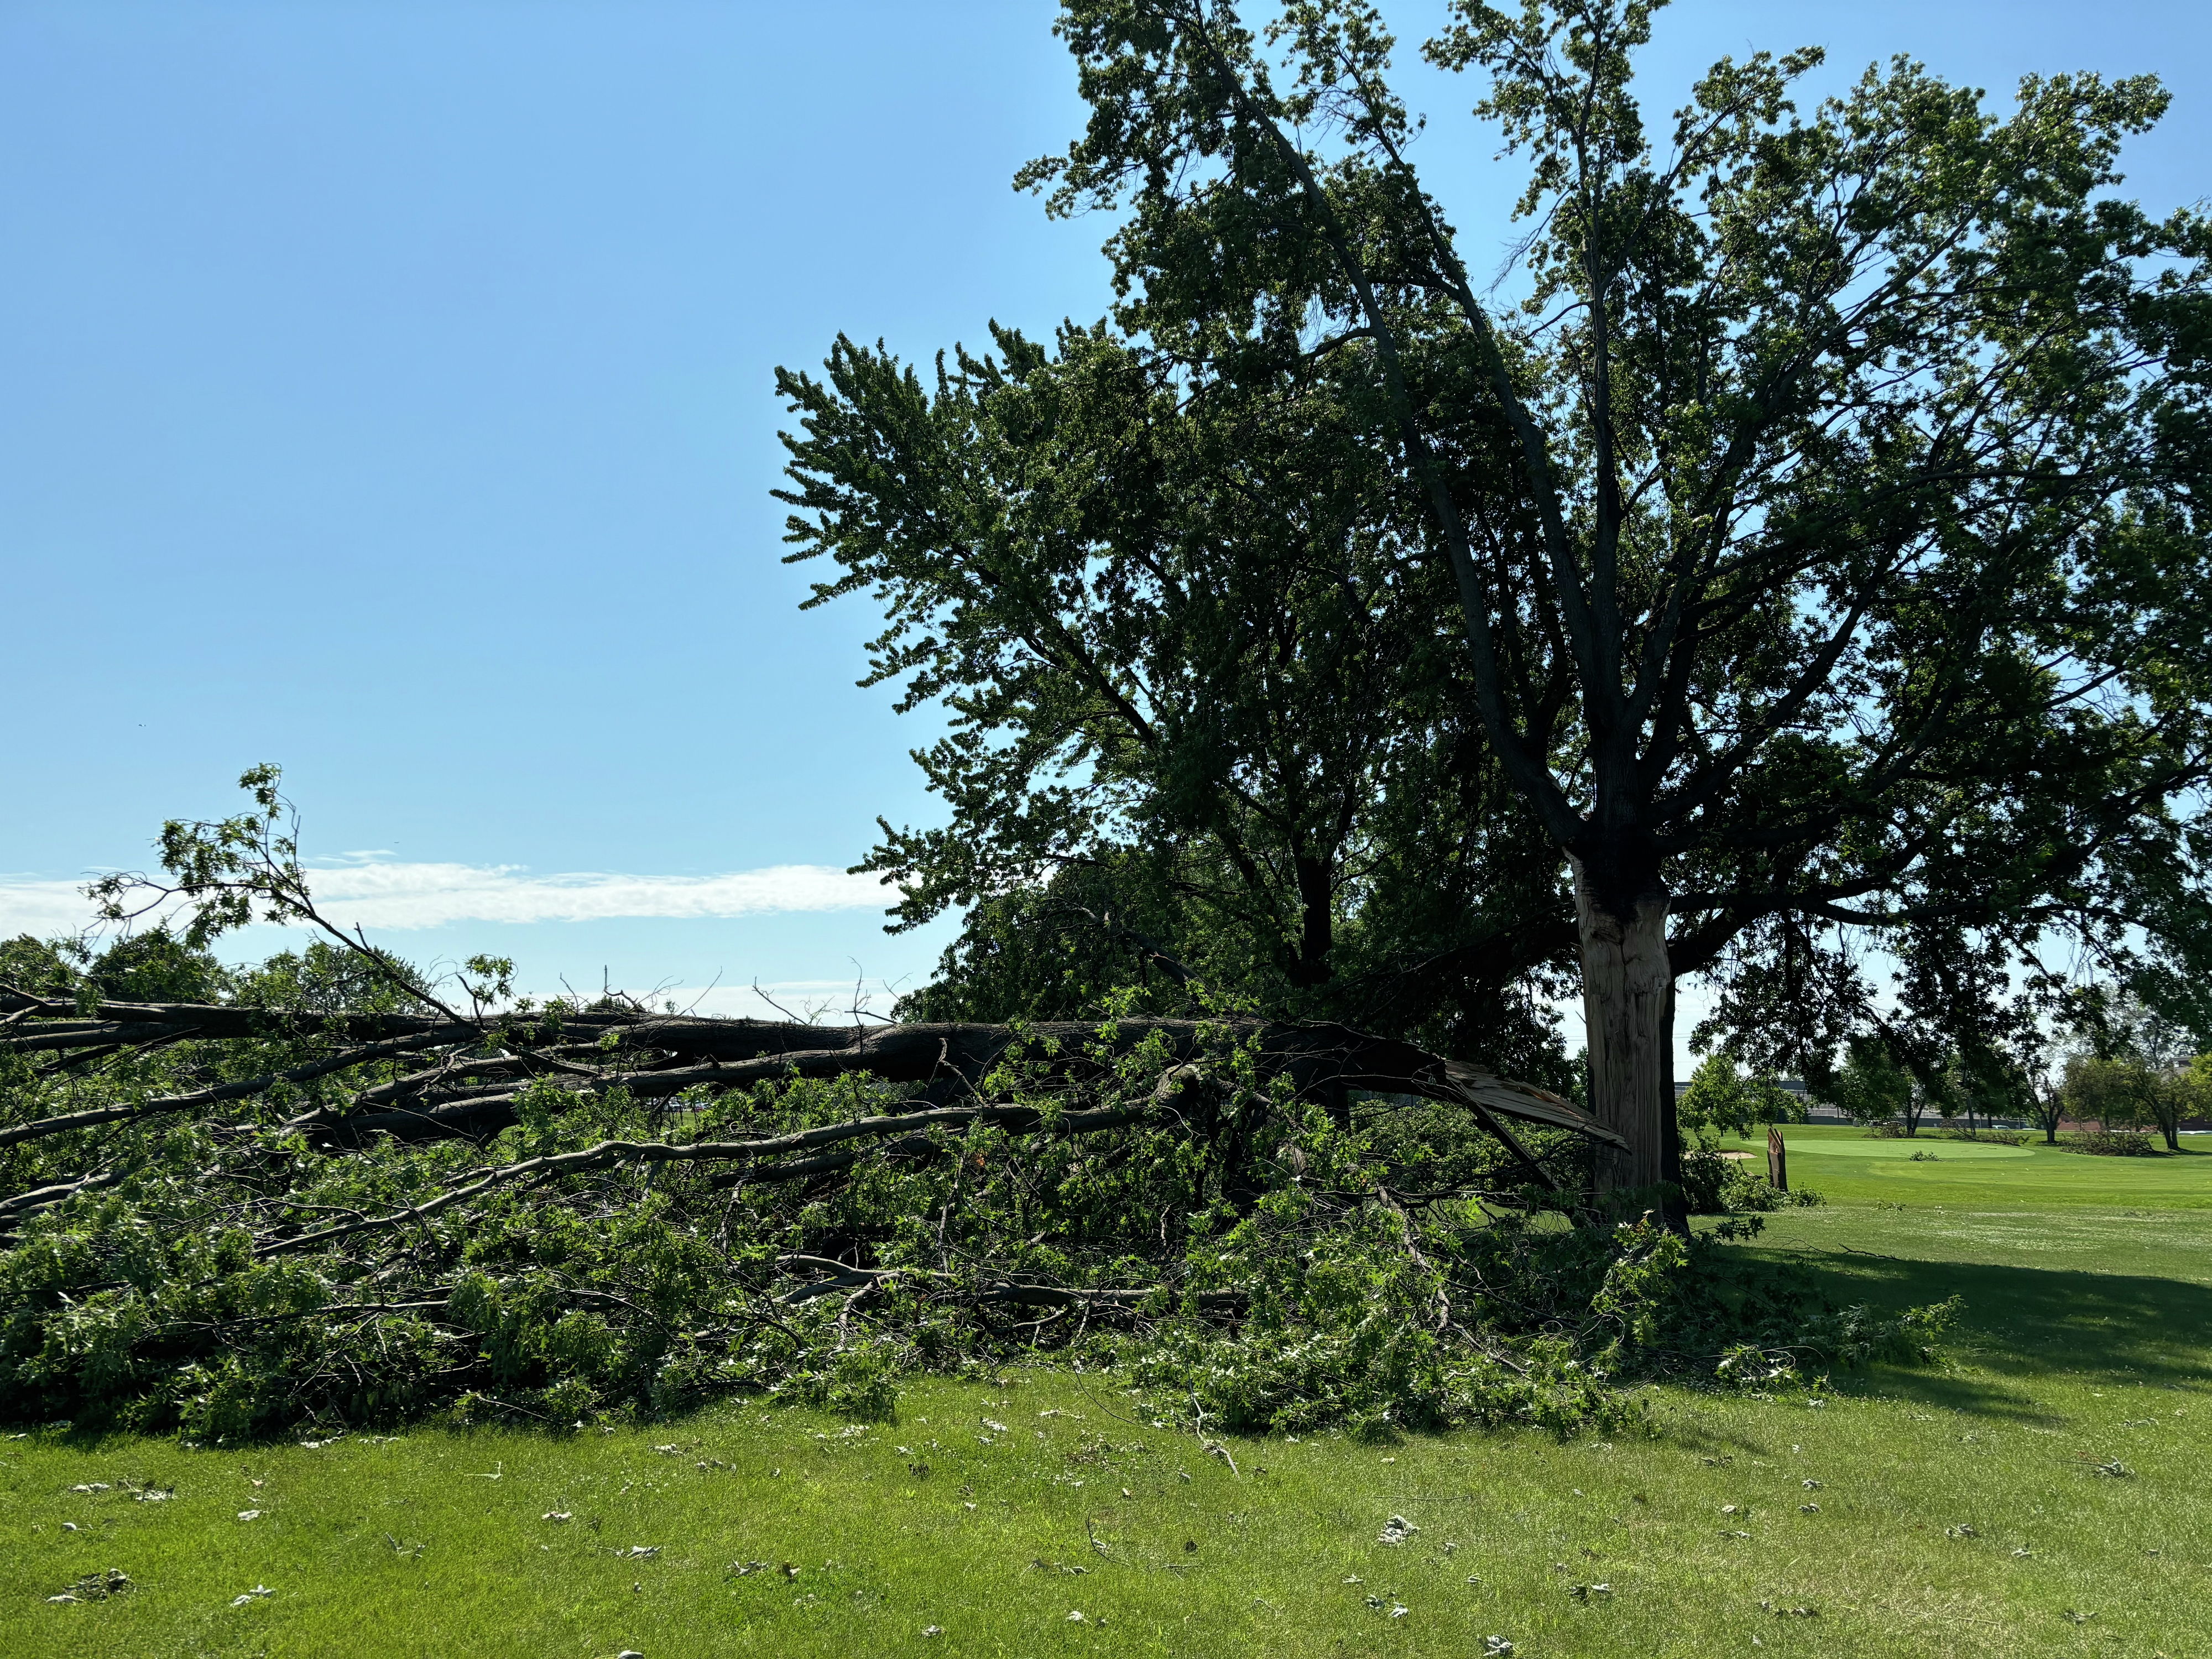 Crews at Inwood Golf Course work to cleanup following severe weather this week